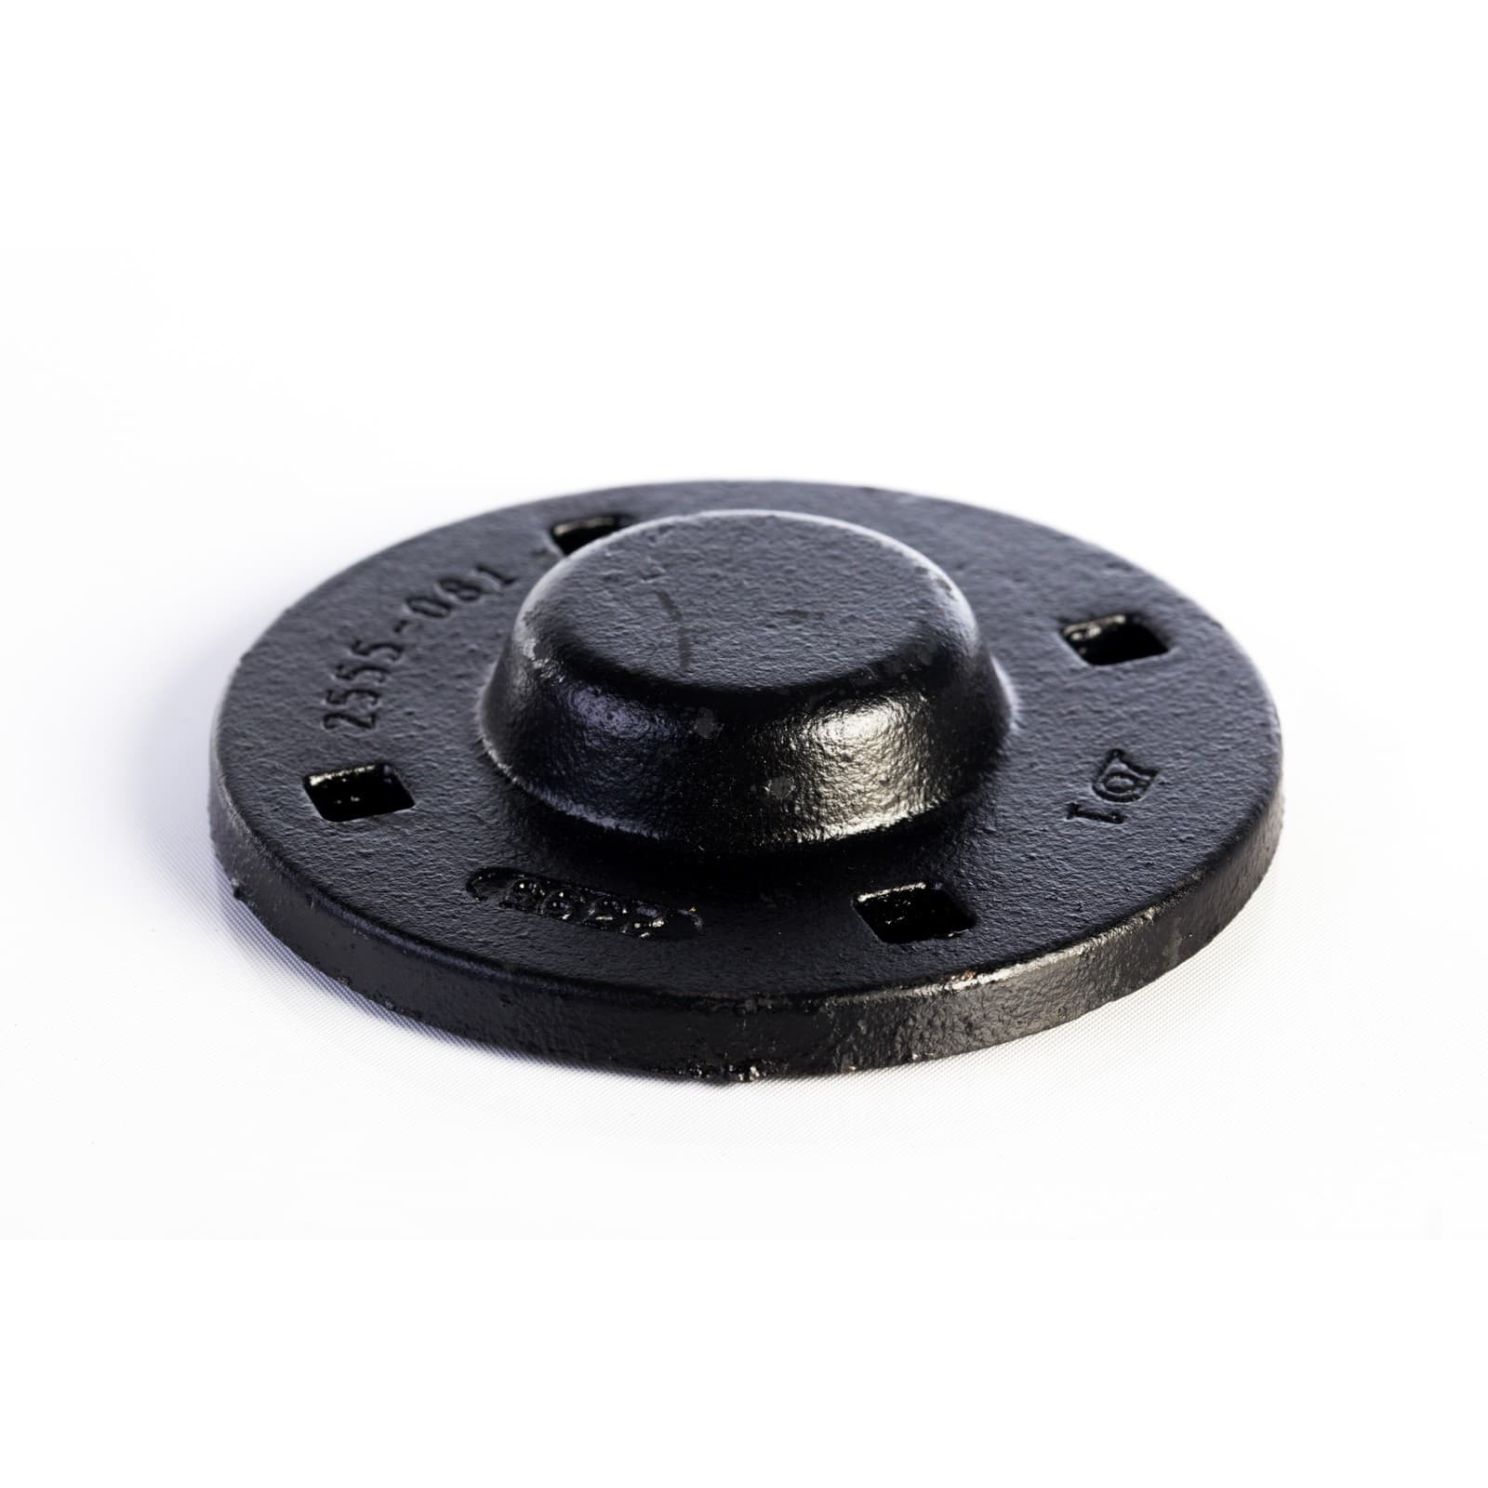 Yetter 2965-352 Cast 4 Bolt Residue Manager Hub Cover